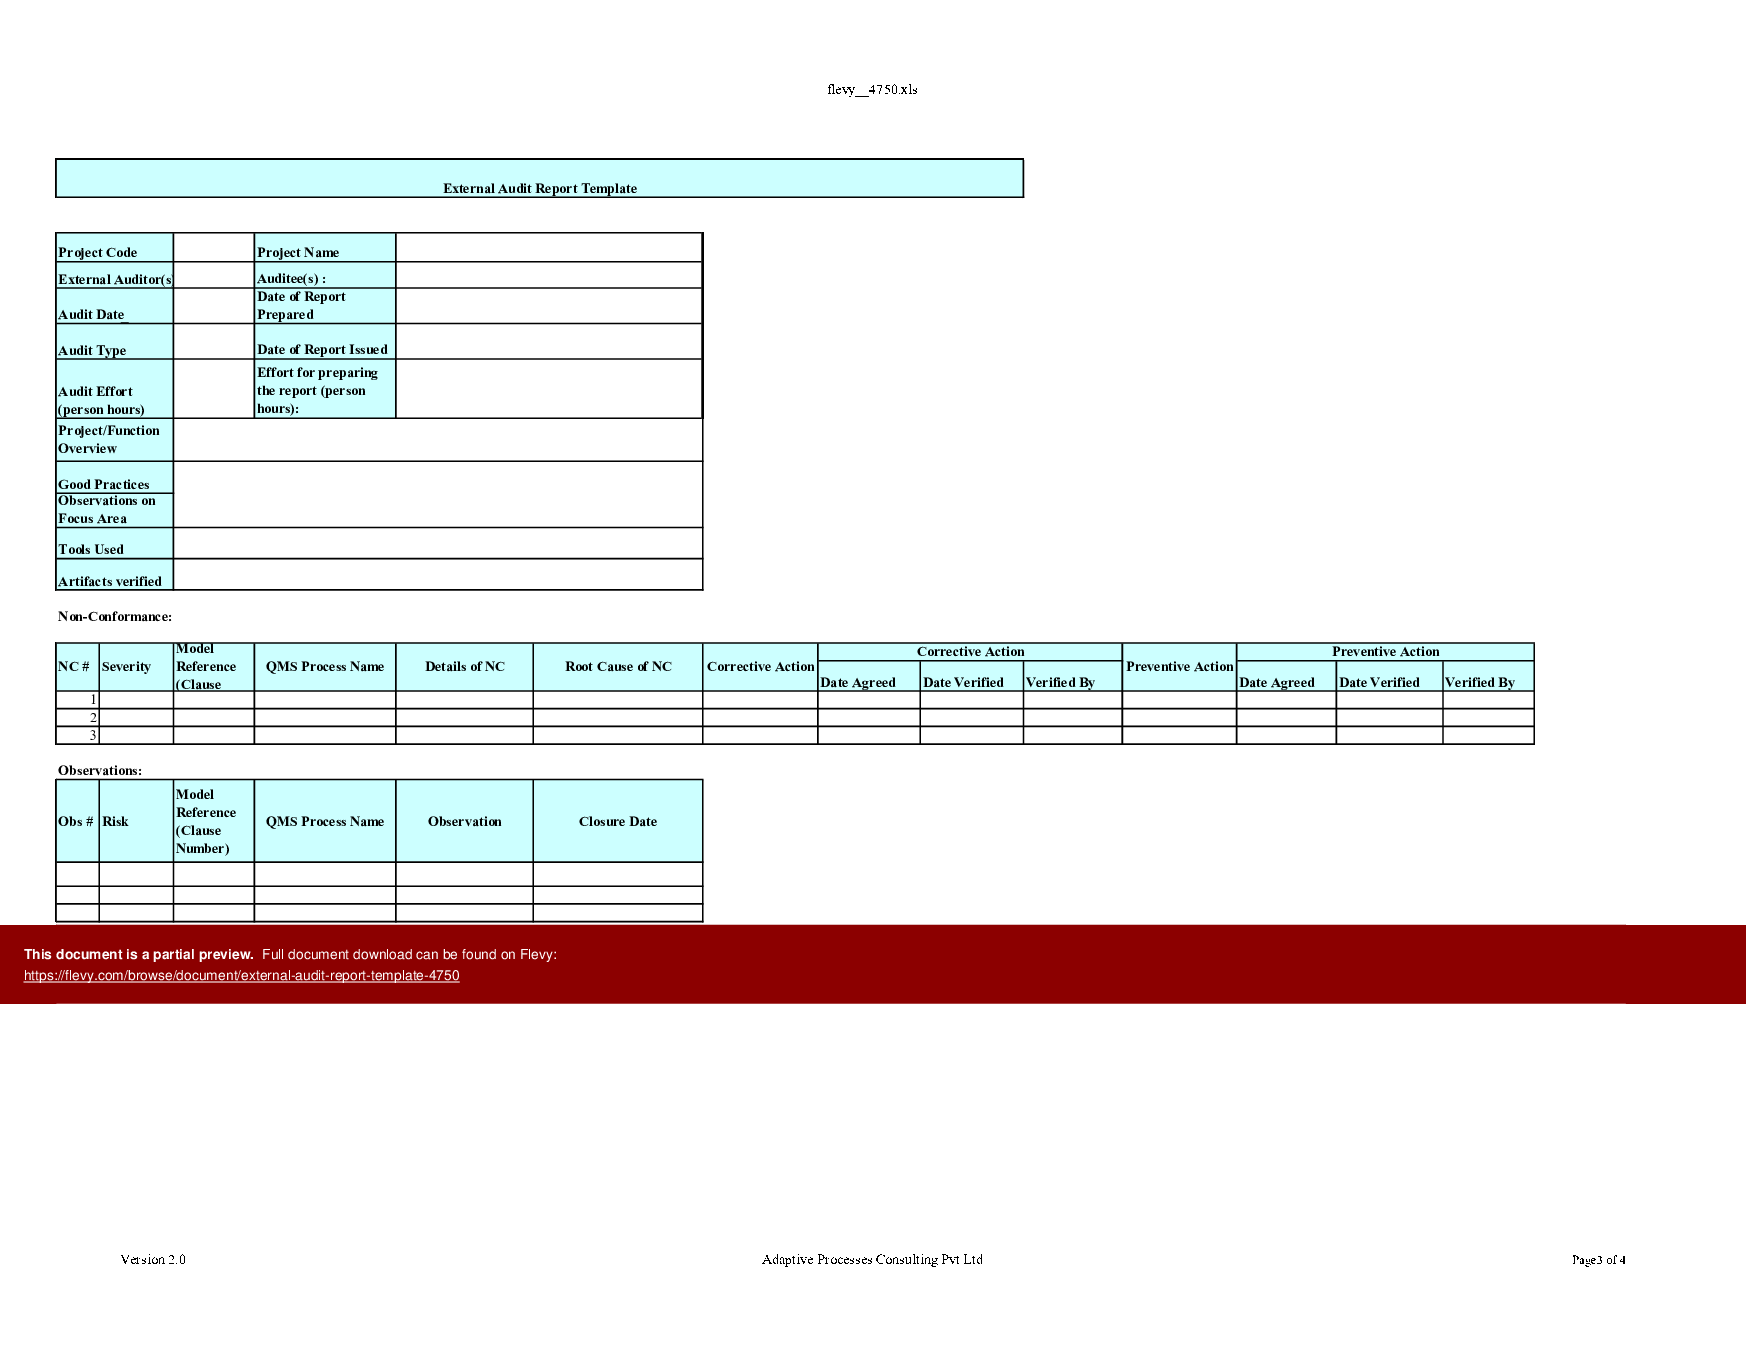 External Audit Report Template (Excel template (XLS)) Preview Image